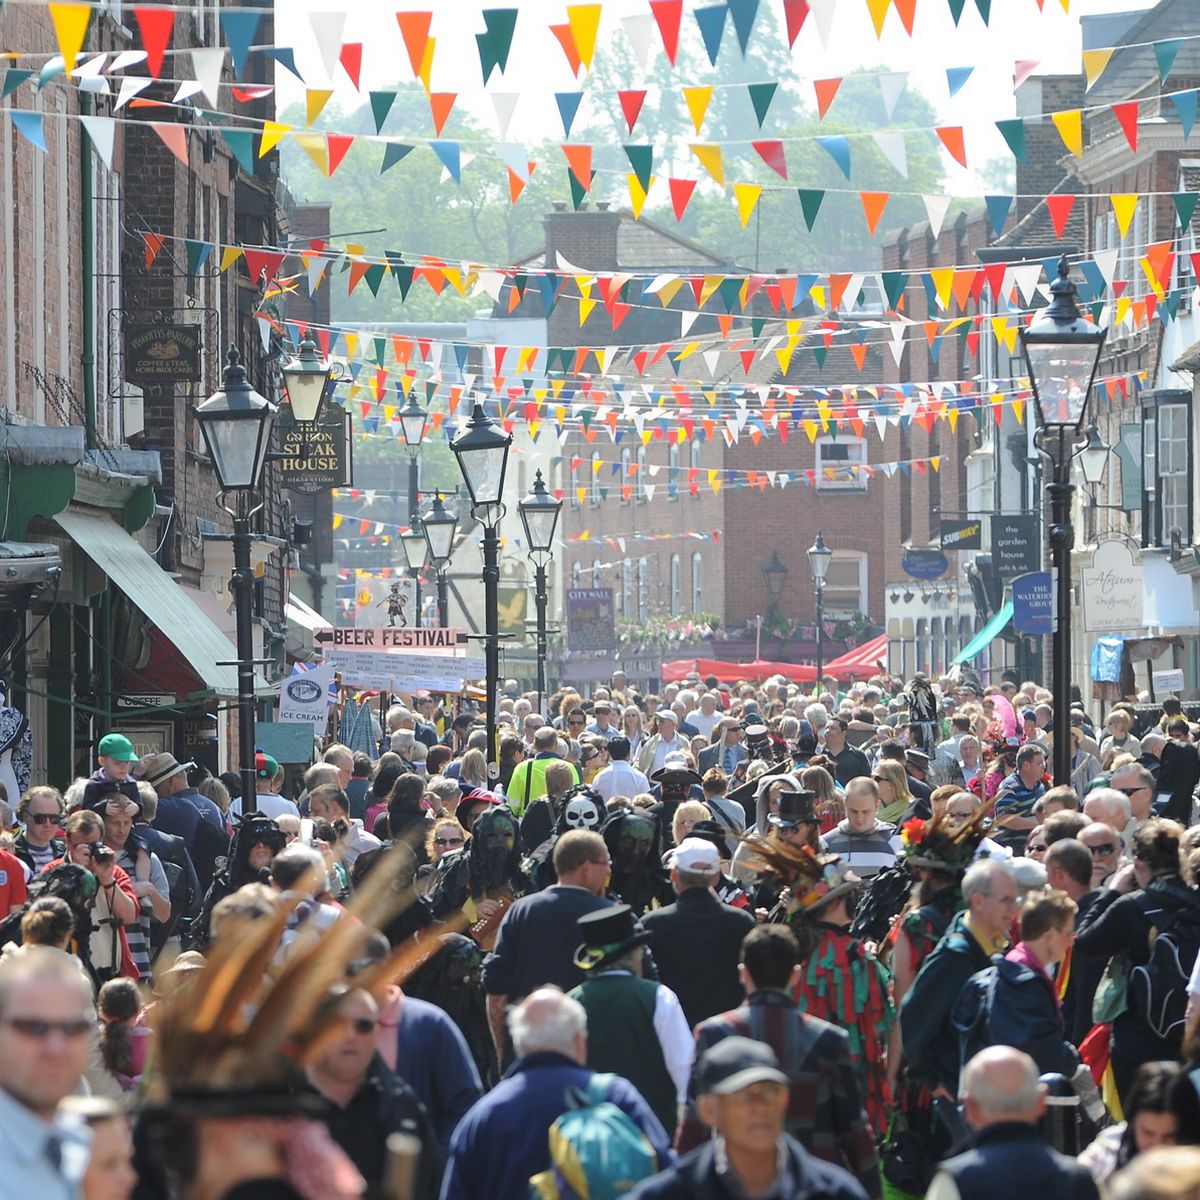 People in rochester high street celebrating sweeps festival